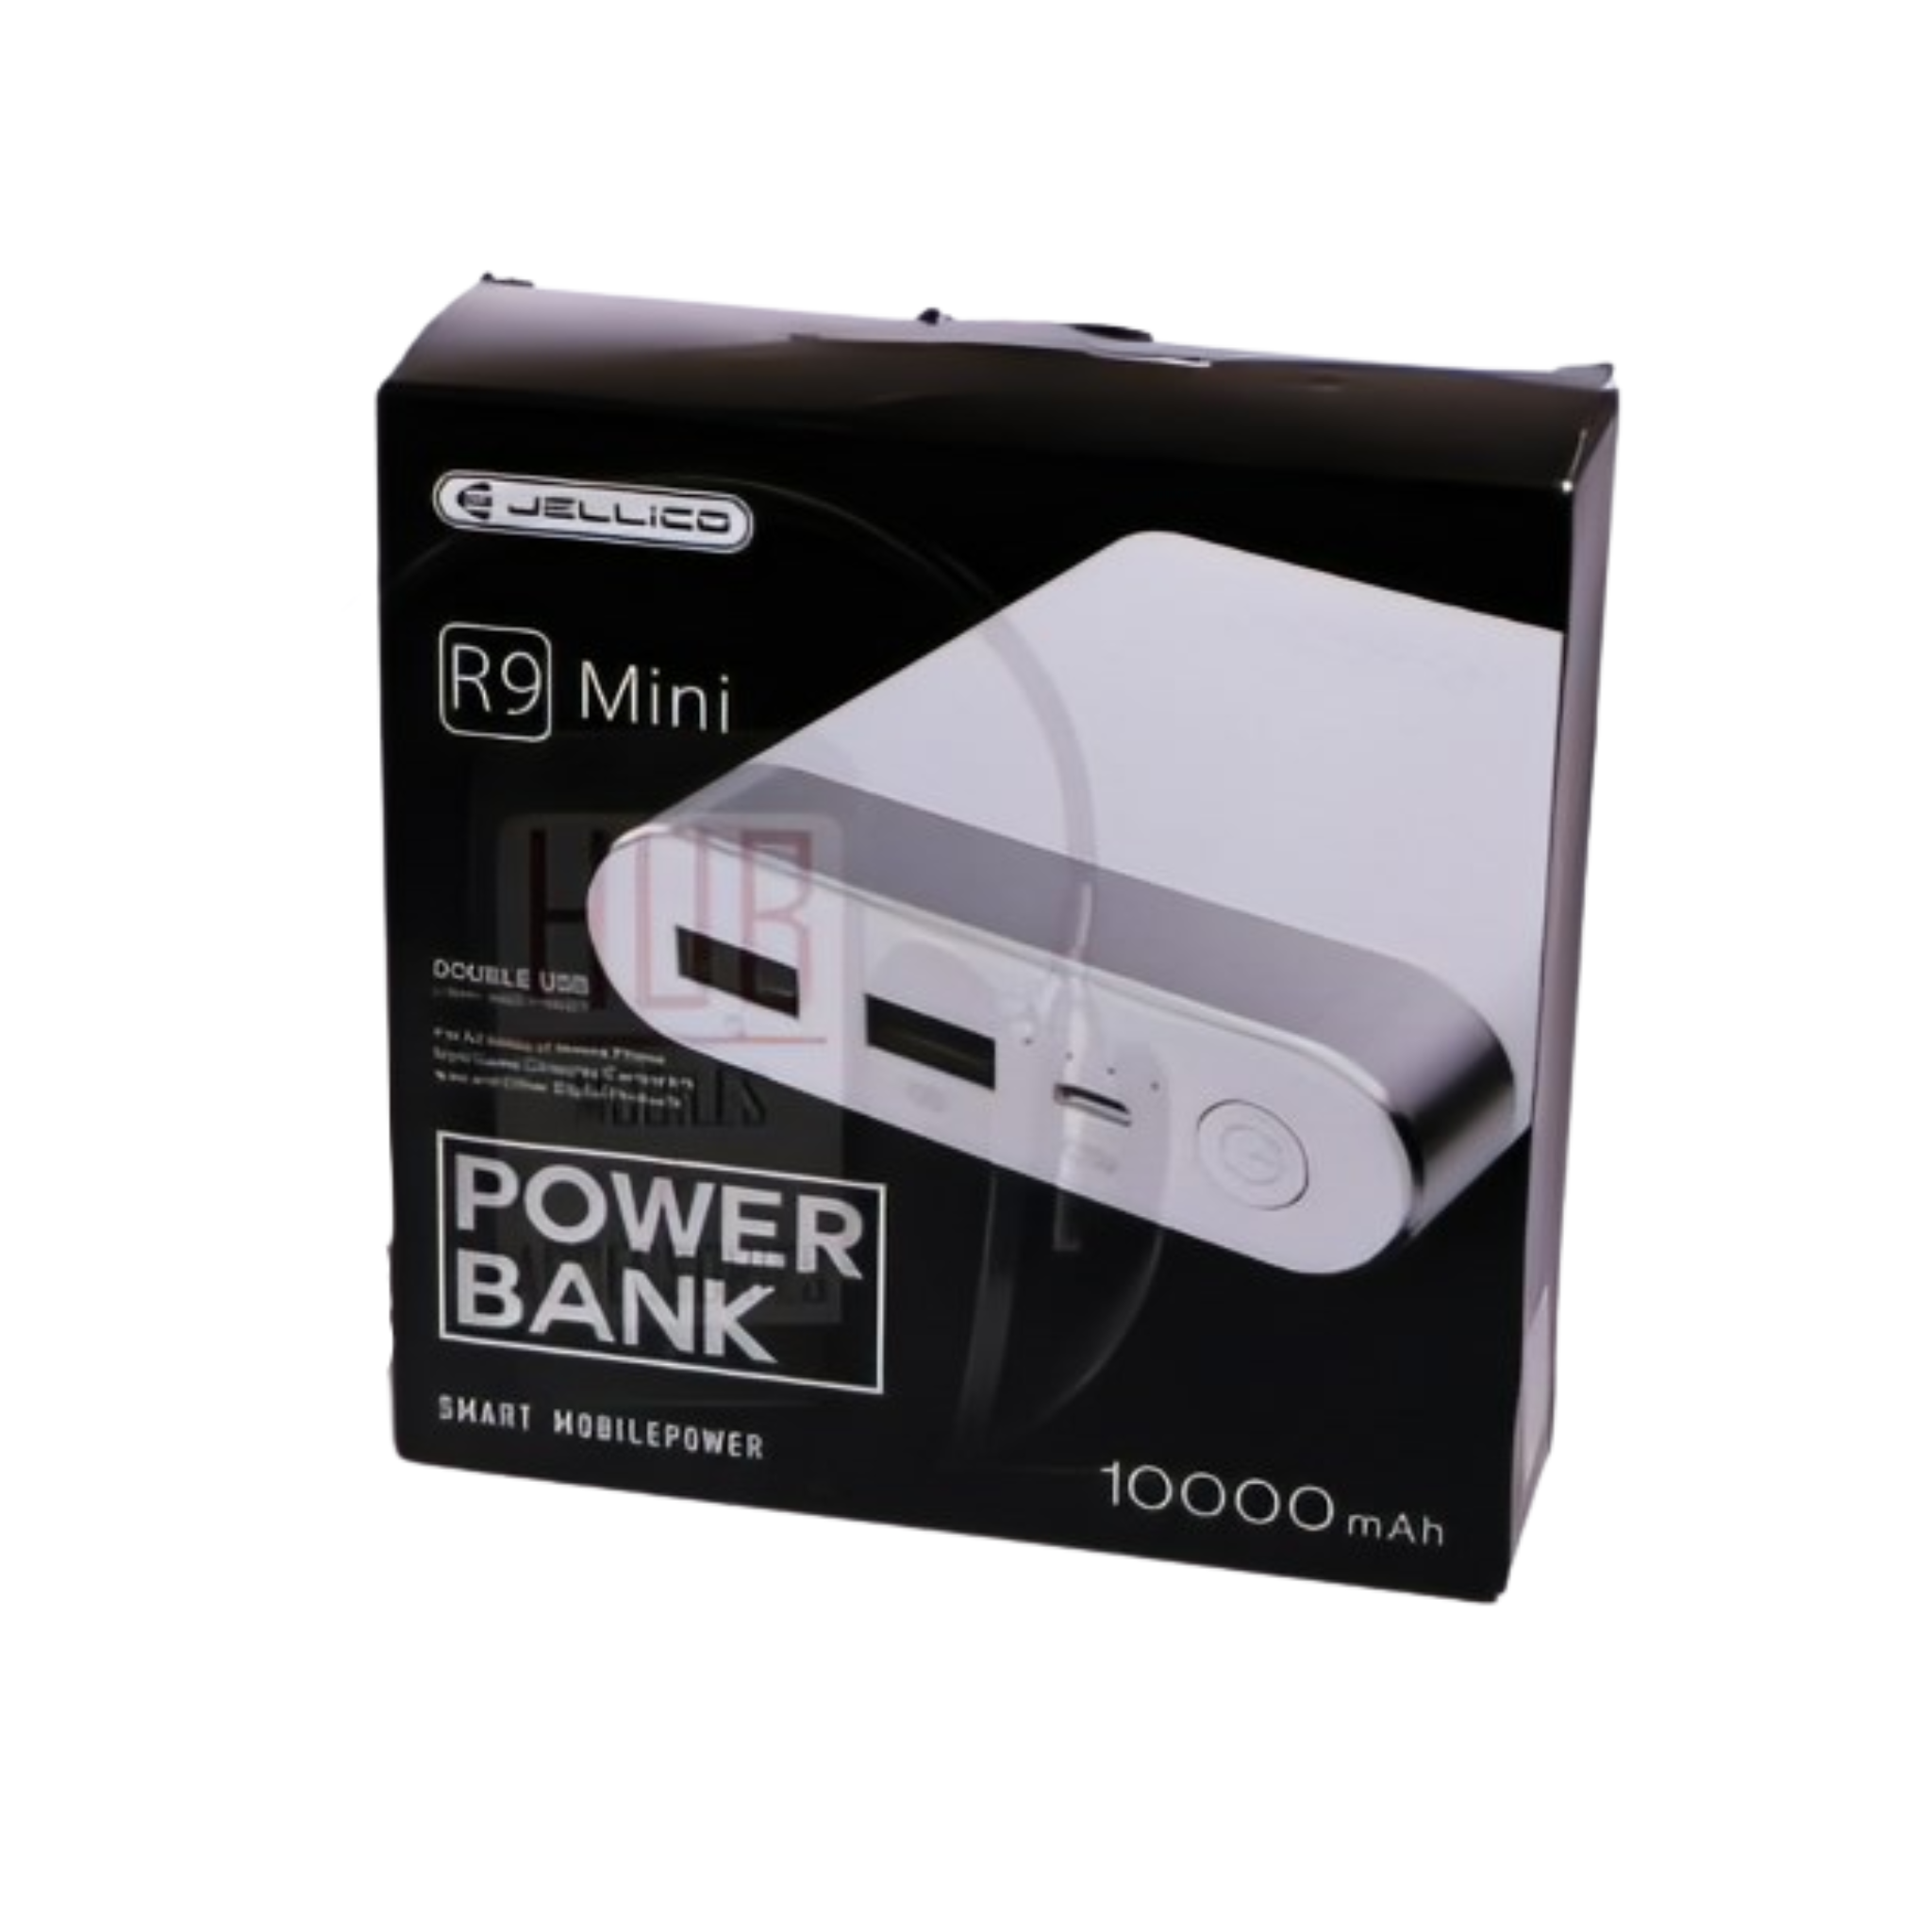 Power Bank, R9 Branded, 2 USB Port, with Charging Cable